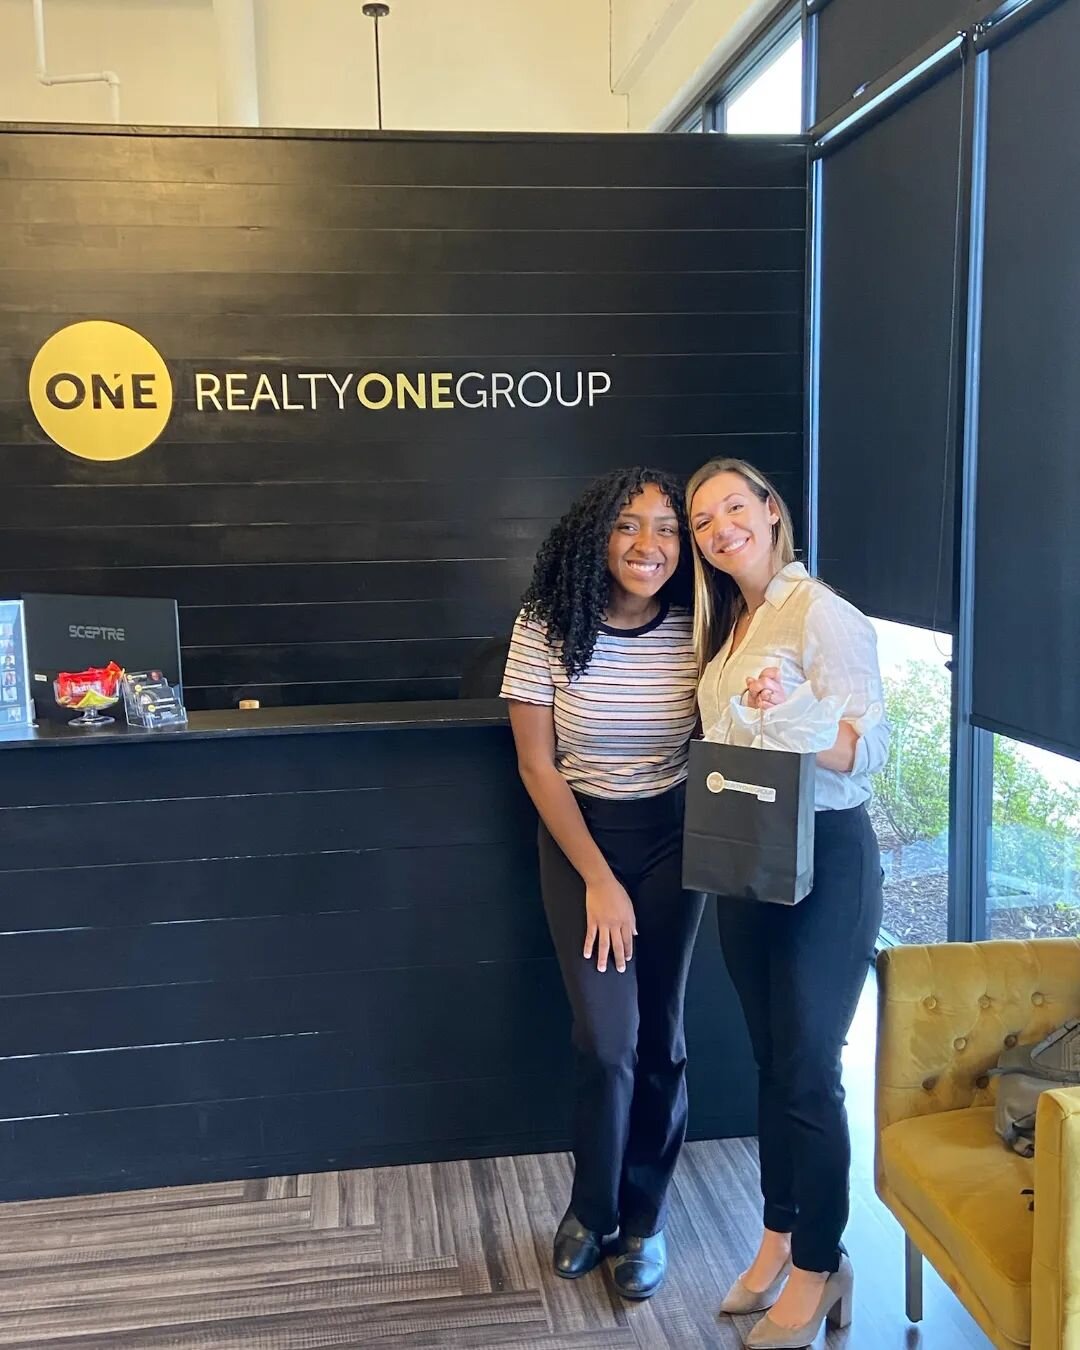 Summer July Brokerage Photo Dump coming in hot! 🔥
........... ...........
Only at Realty One Group Edge.